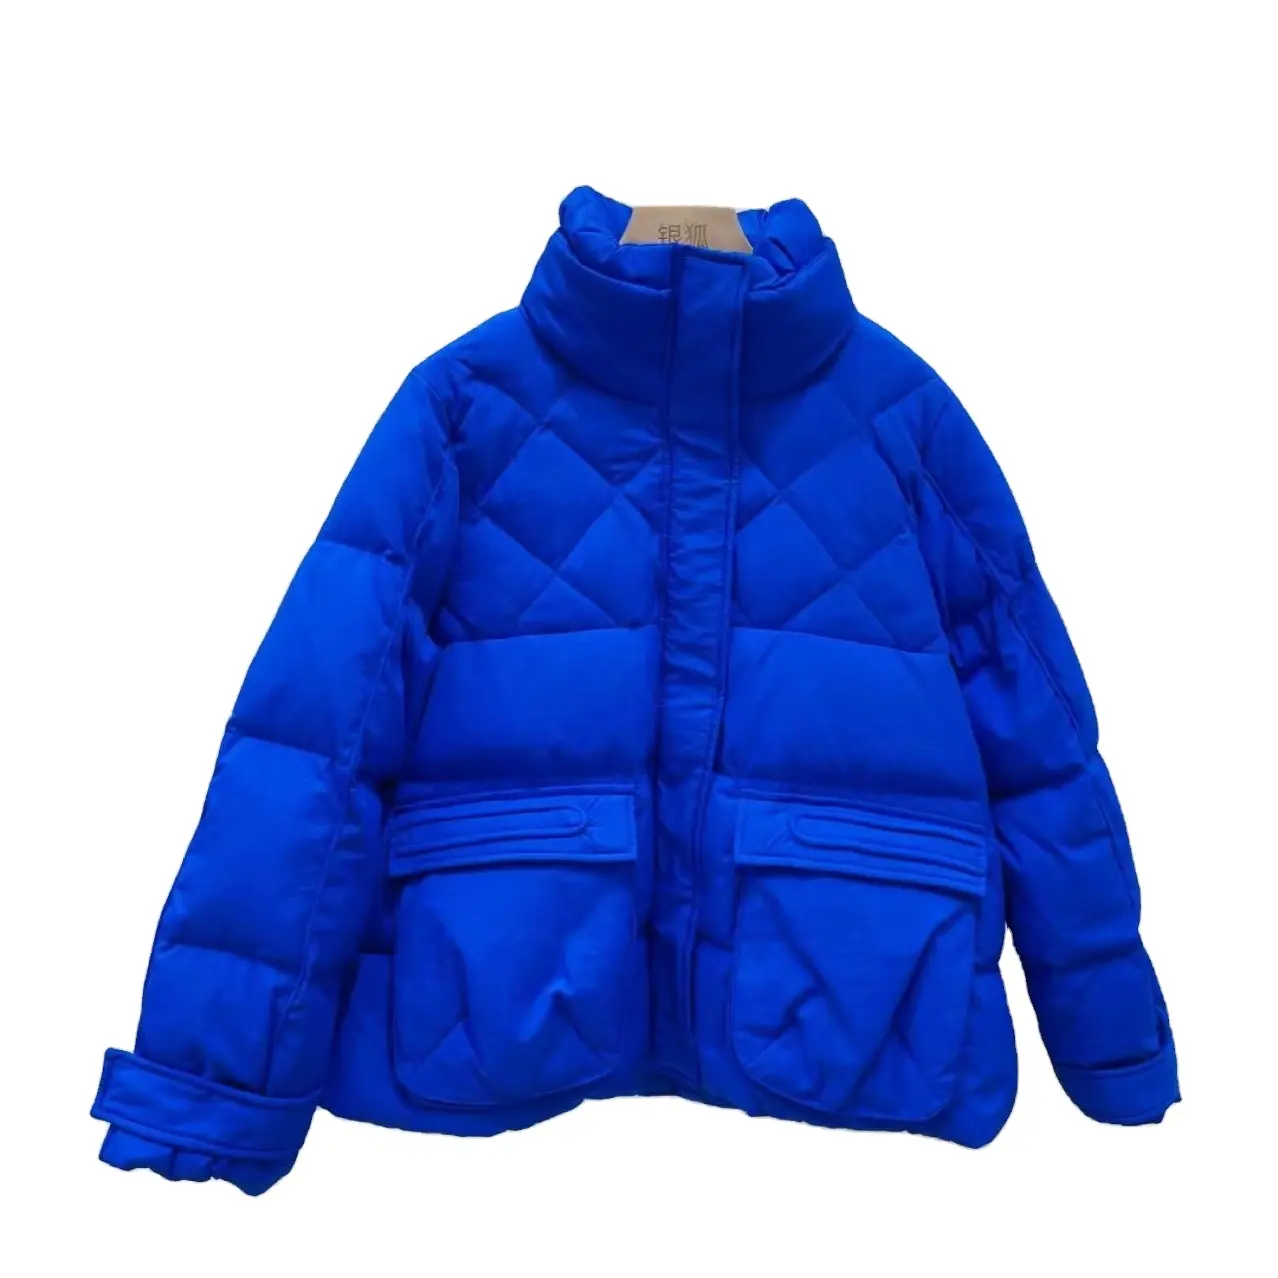 2022 Autumn And Winter White Duck Down Jacket Women's Stand-up Collar Candy-colored Bread Coat Klein Blue Jacket